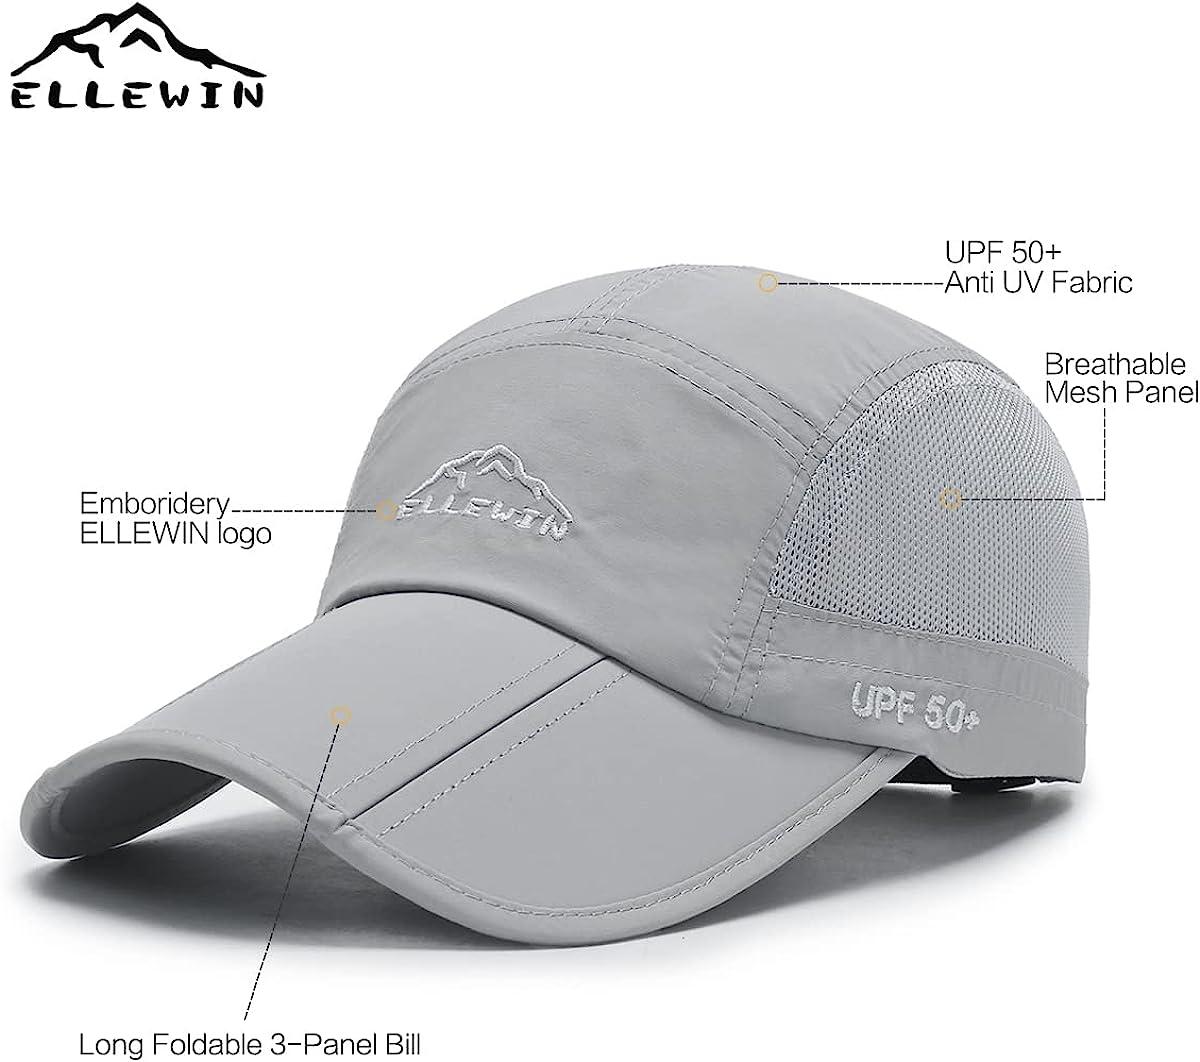 ELLEWIN Unisex Baseball Cap UPF 50 Unstructured Hat with Foldable